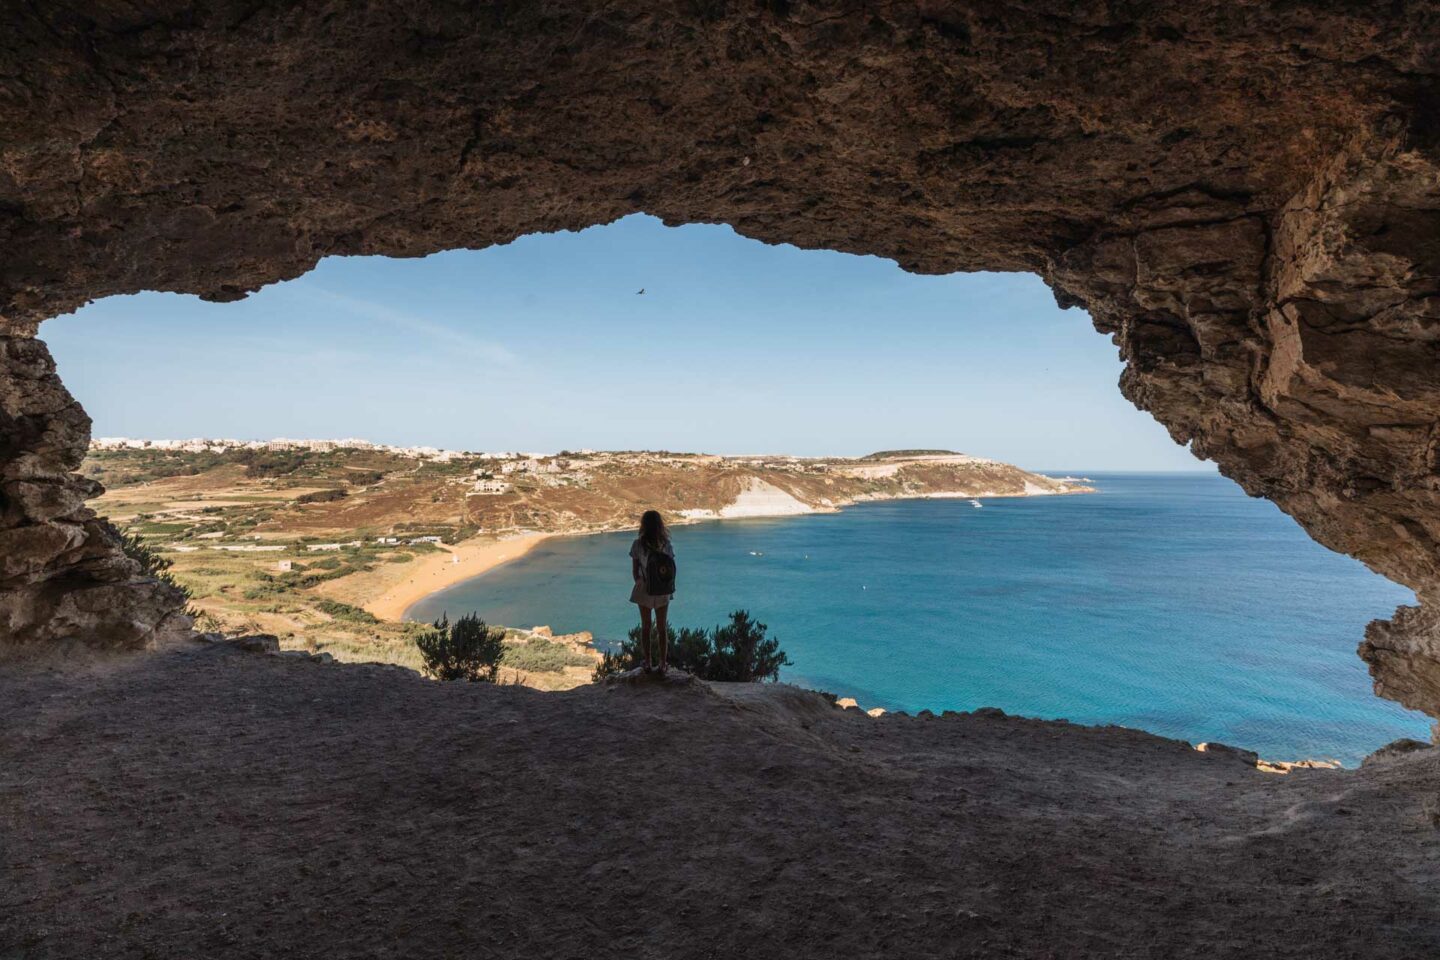 day trip to Gozo, Gozo day trip, one day in Gozo, a day in Gozo, day trips to Gozo, Gozo day trip from Valletta, Gozo itinerary, day trip to Gozo from Valletta, day trip to Gozo from St. Julian's, day trip to Gozo and Comino,